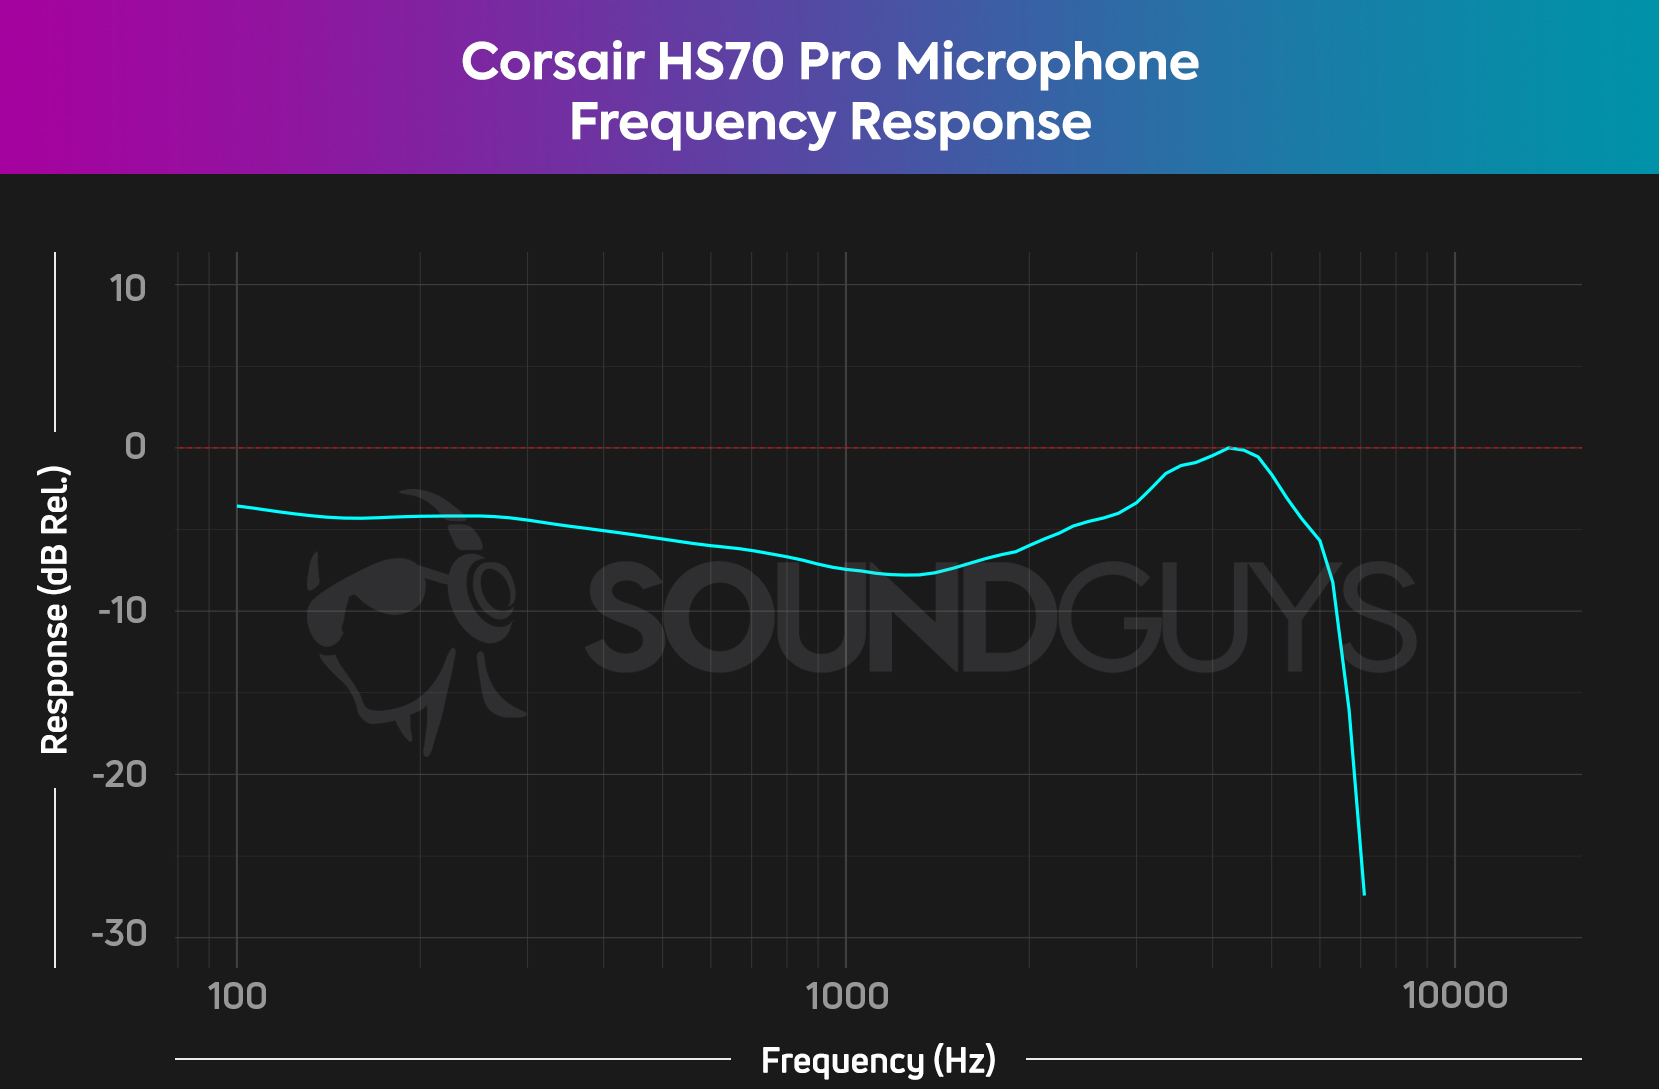 The Corsair HS70 Pro Wireless microphone frequency response chart, showing a generally flat response with a bit of a peak in the high mids.